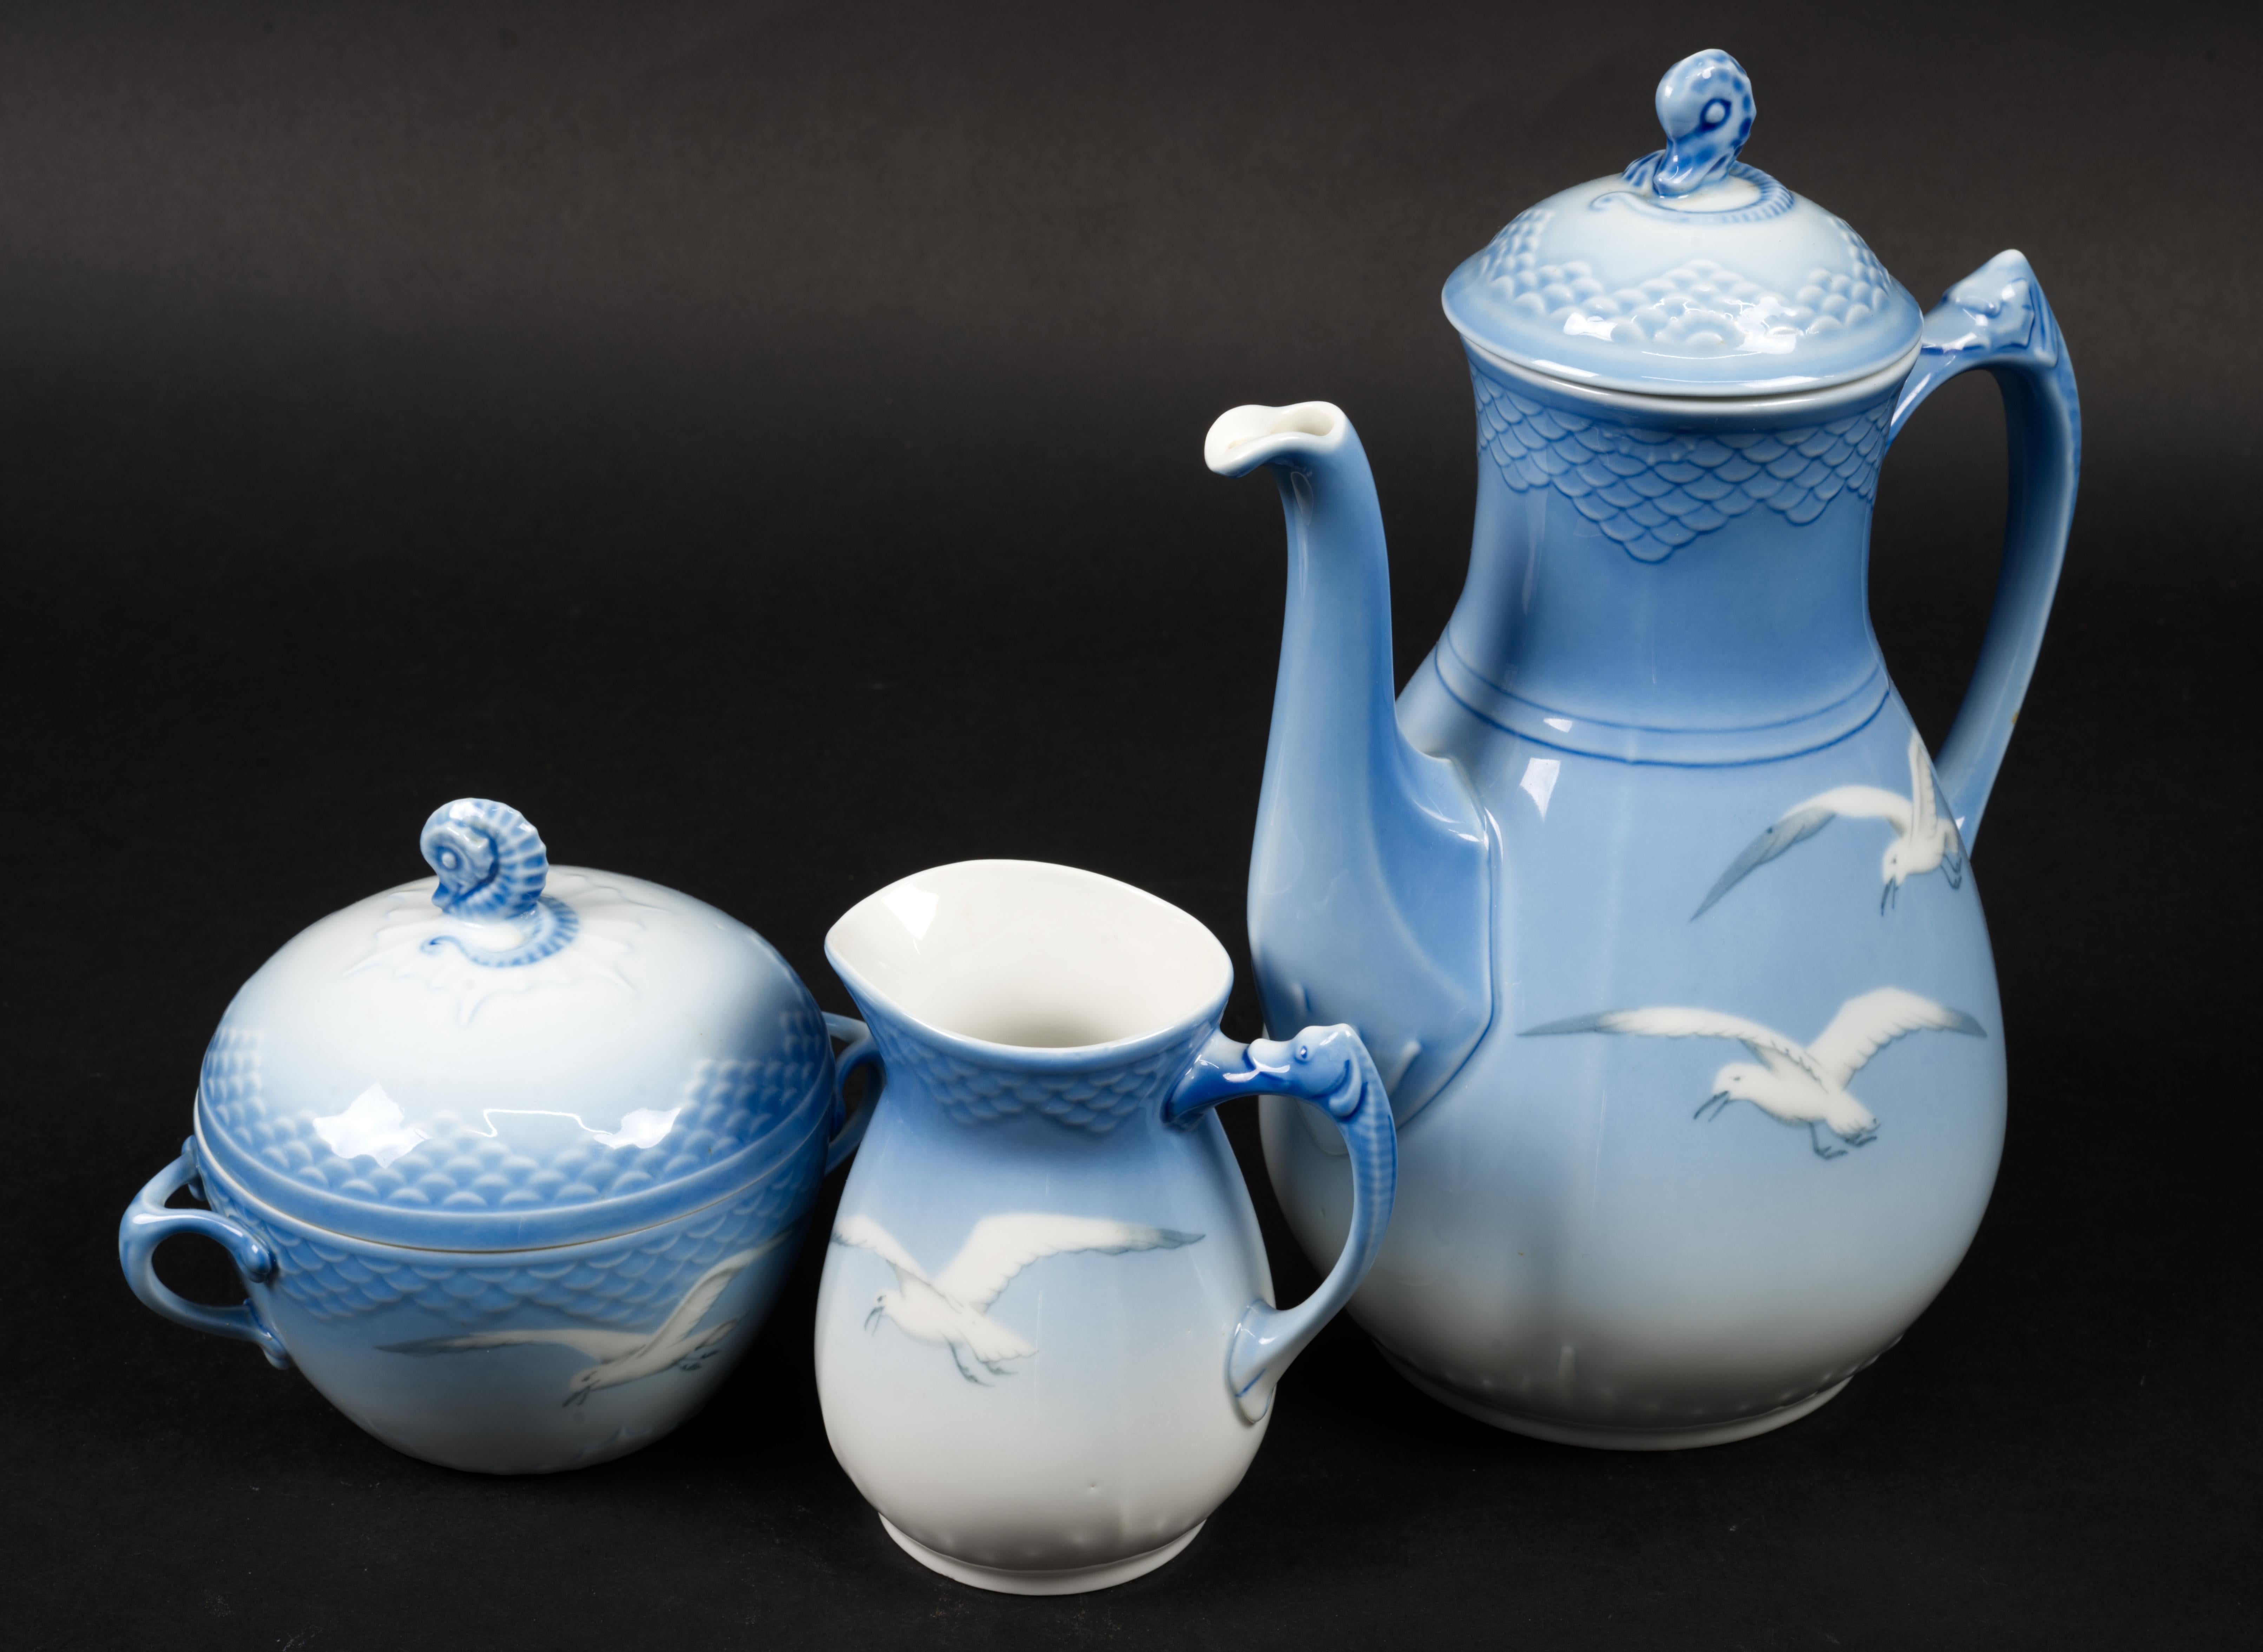 
Bing & Grondahl Seagull coffee service set consists of coffee pot, creamer, and covered sugar bowl.

Reliefs of scales on the rim and handles of the pieces and on the lids are shaded in pale blue with ombre effect; creamer and coffee pot have